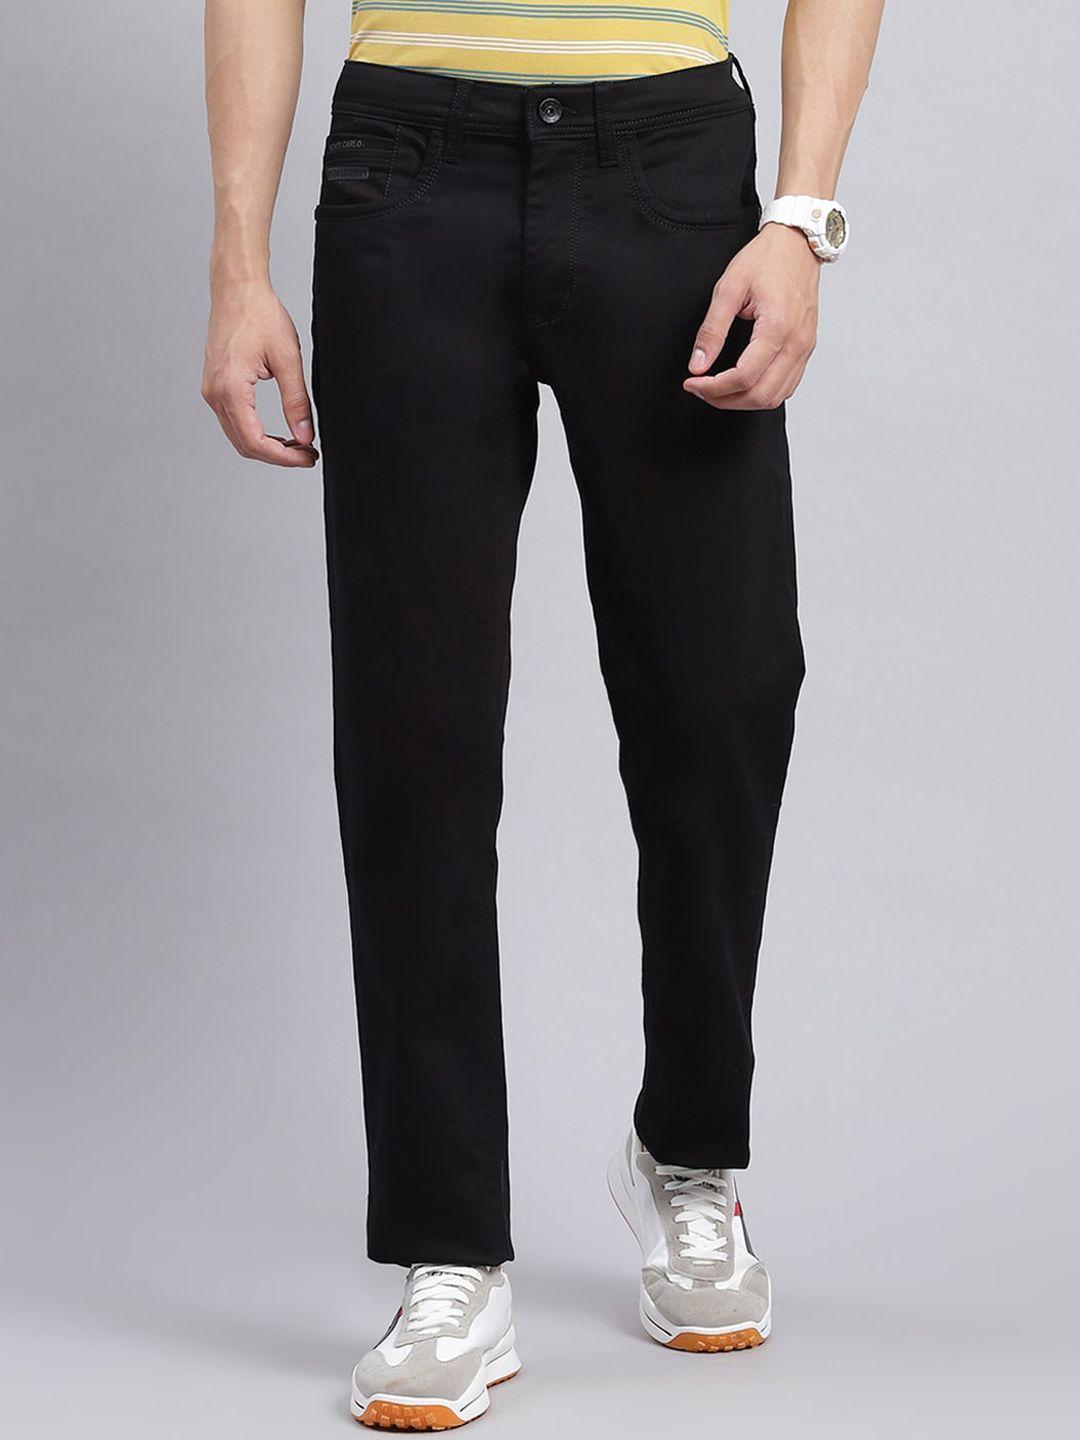 monte-carlo-men-smart-mid-rise-straight-fit-jeans